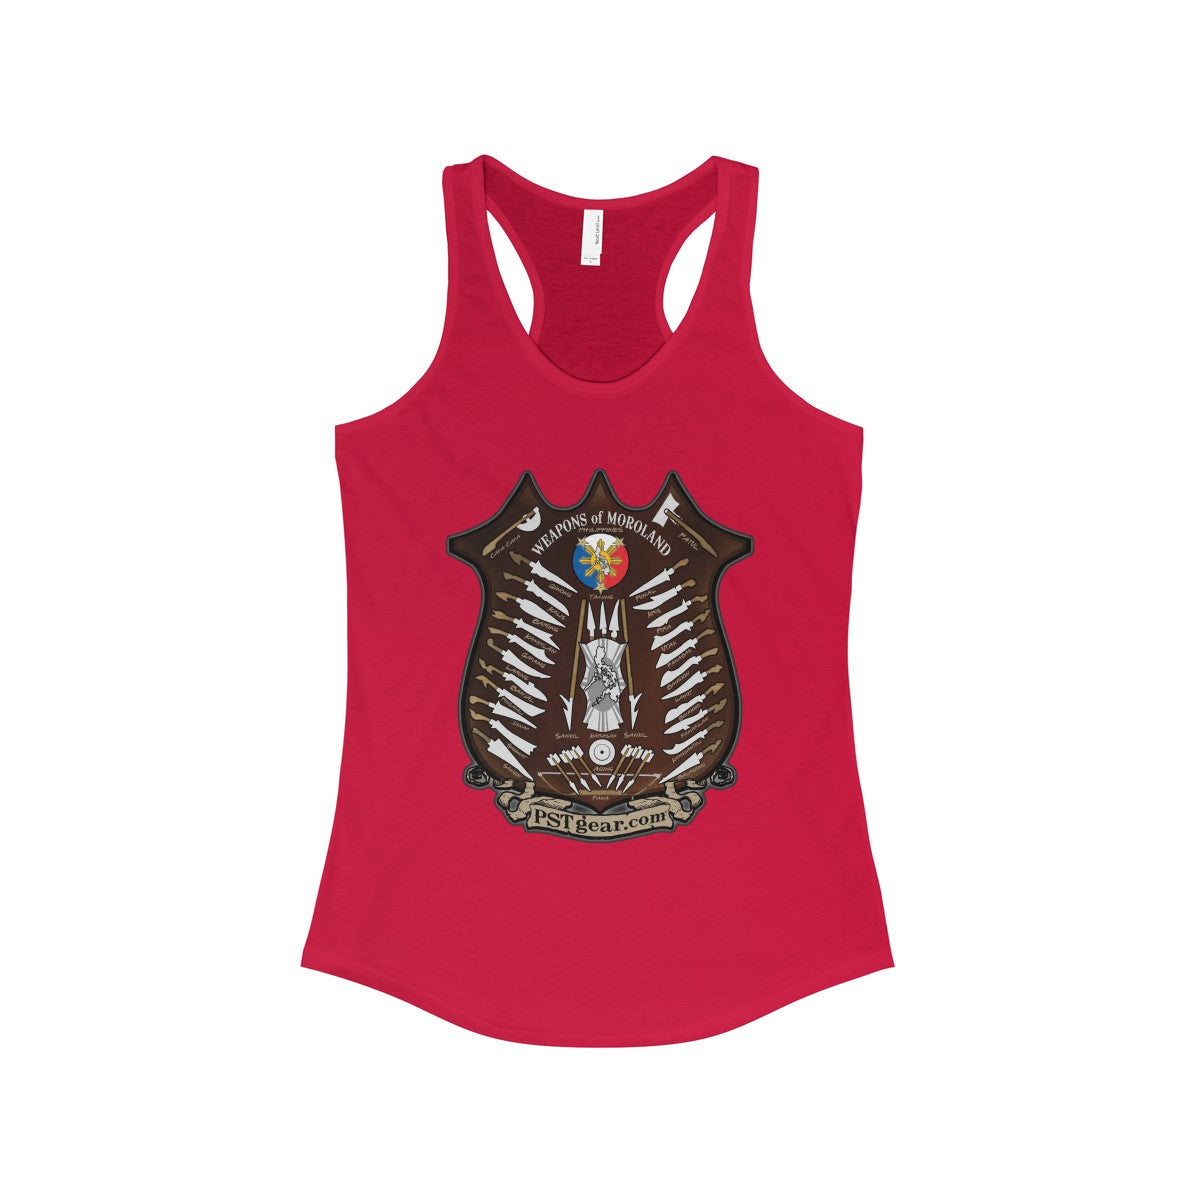 Weapons of Moroland Womens Tank Top